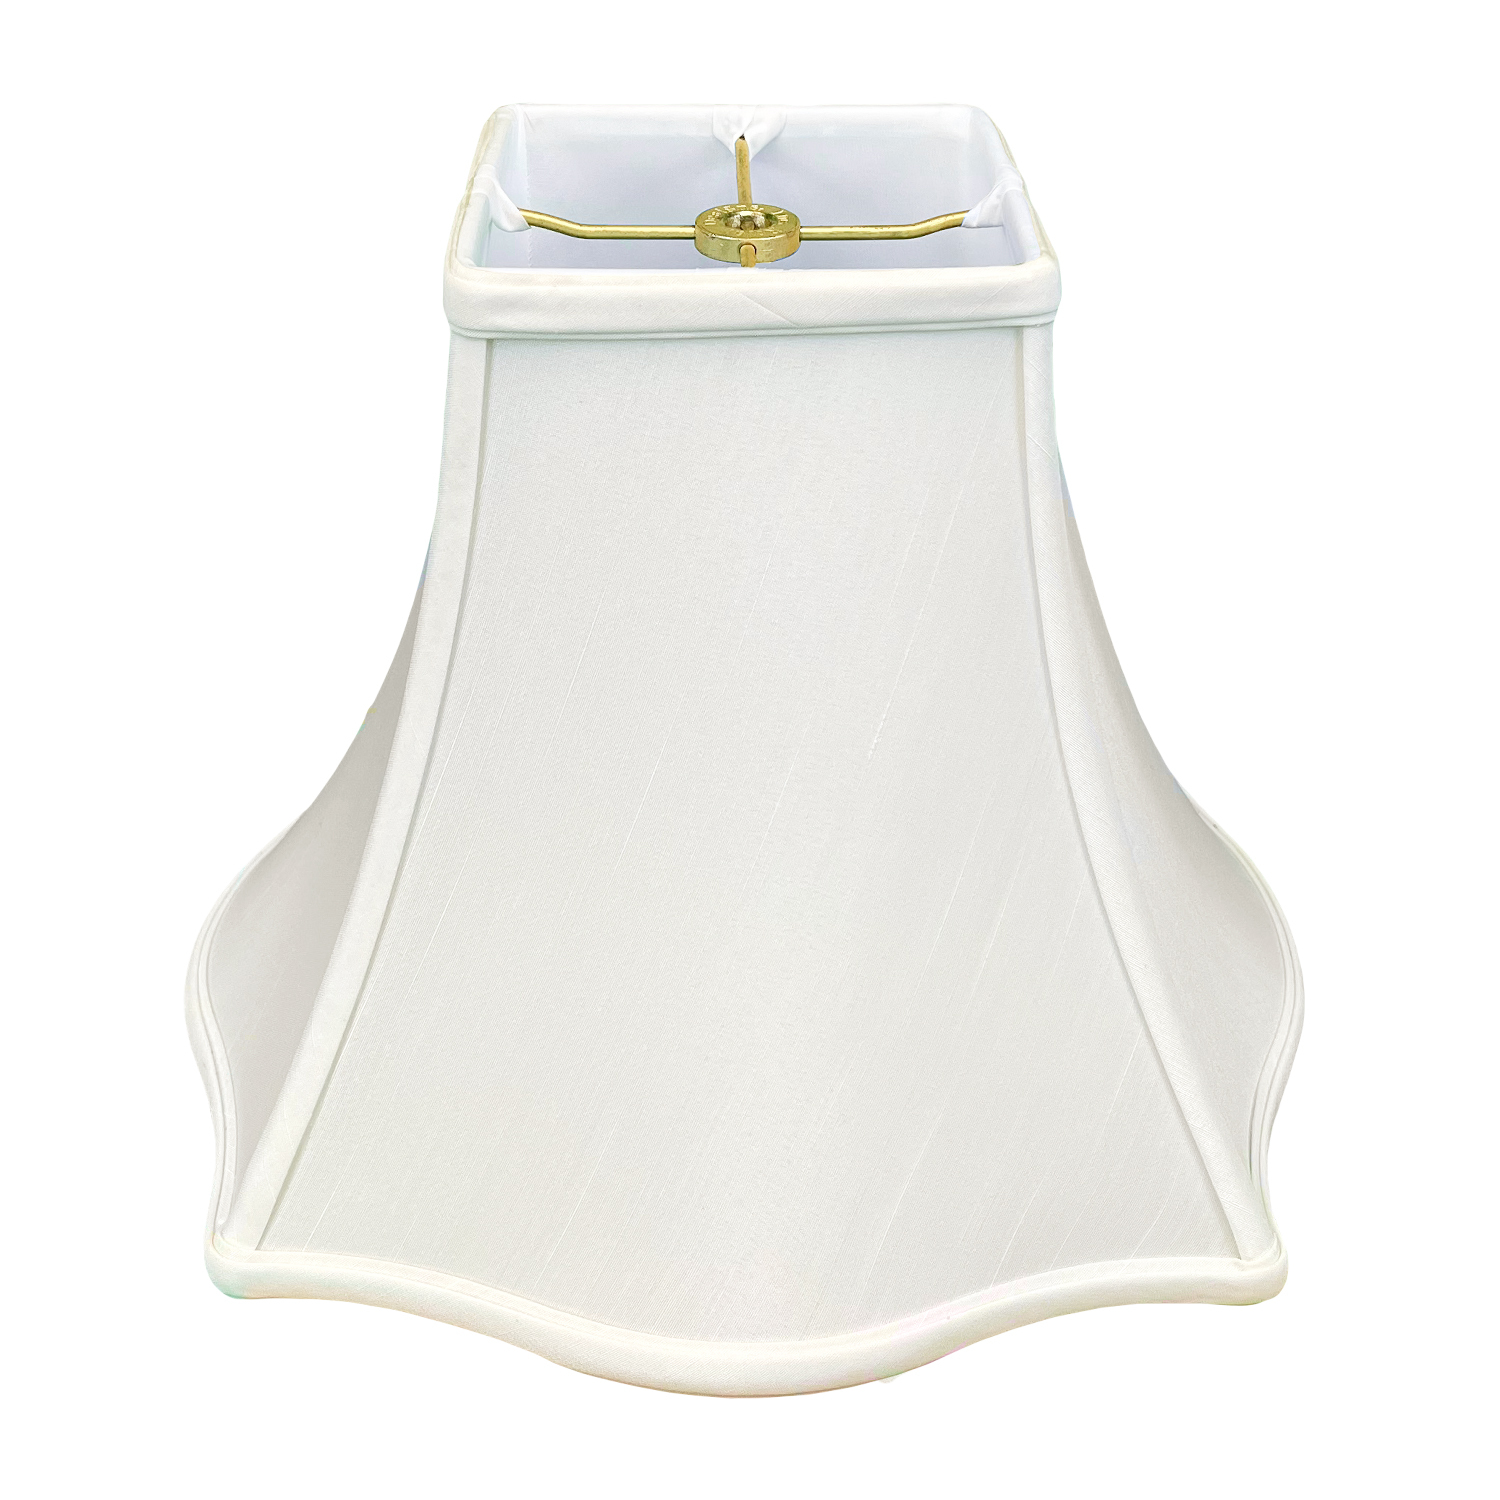 Royal Designs Fancy Square Bell Basic Lamp Shade, White, 4 x 10 x 8.5